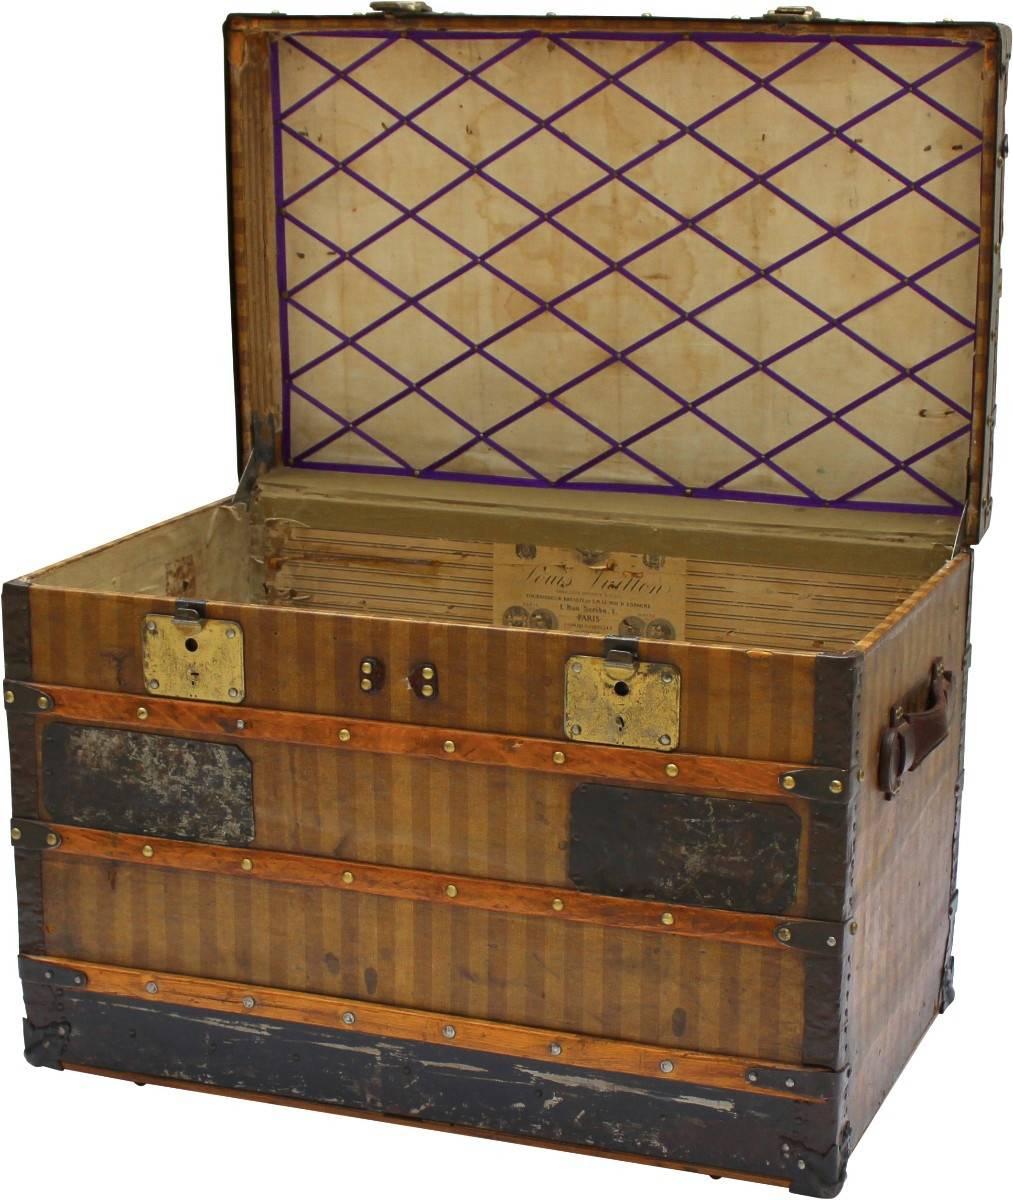 A stately Louis Vuitton courier trunk of an early vintage due to its covering in the traditional red and beige striped canvas design. Beautiful brass hardware and timber slats fastened with extra-large brass buttons add to its allure. The interior